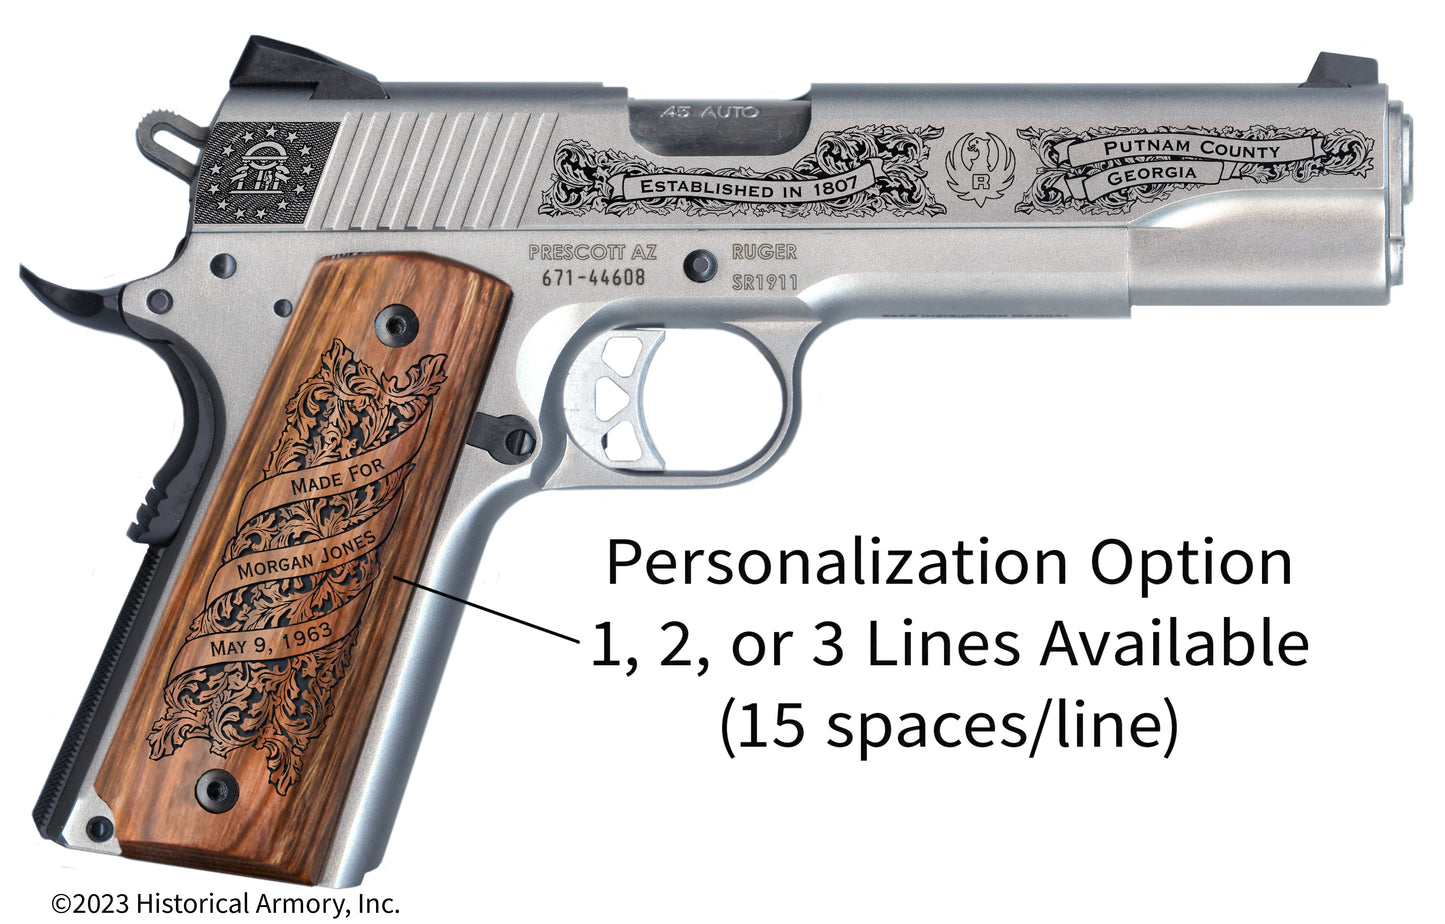 Putnam County Georgia Personalized Engraved .45 Auto Ruger 1911